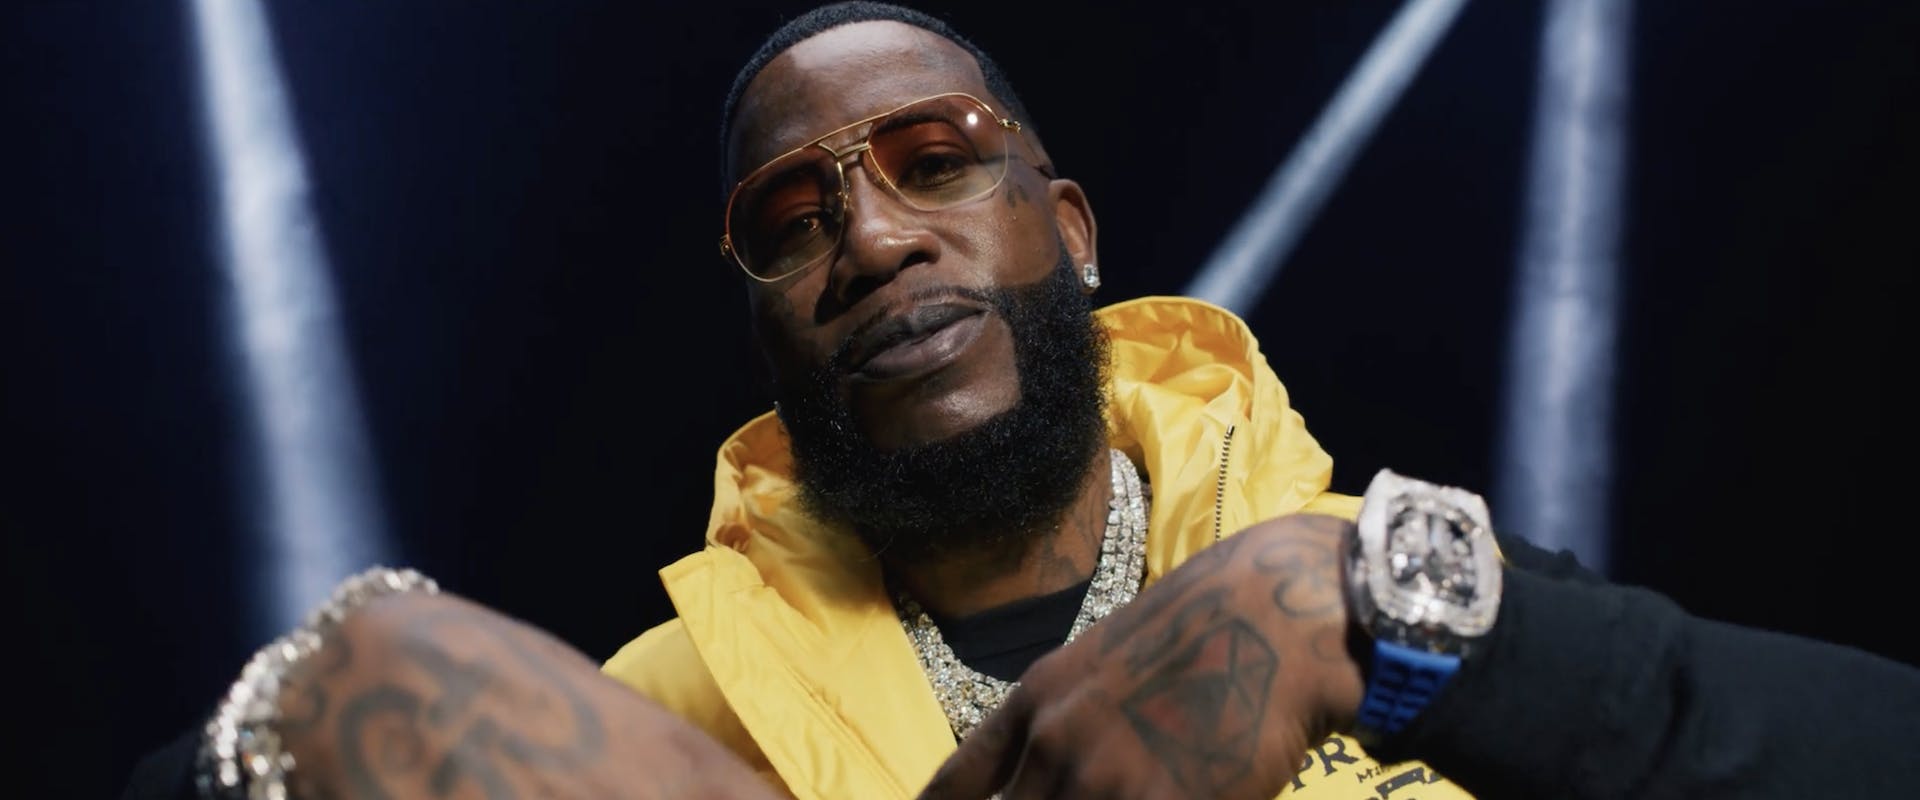 Gucci Mane Releases New Song & Video 'Fake Friends' — Watch